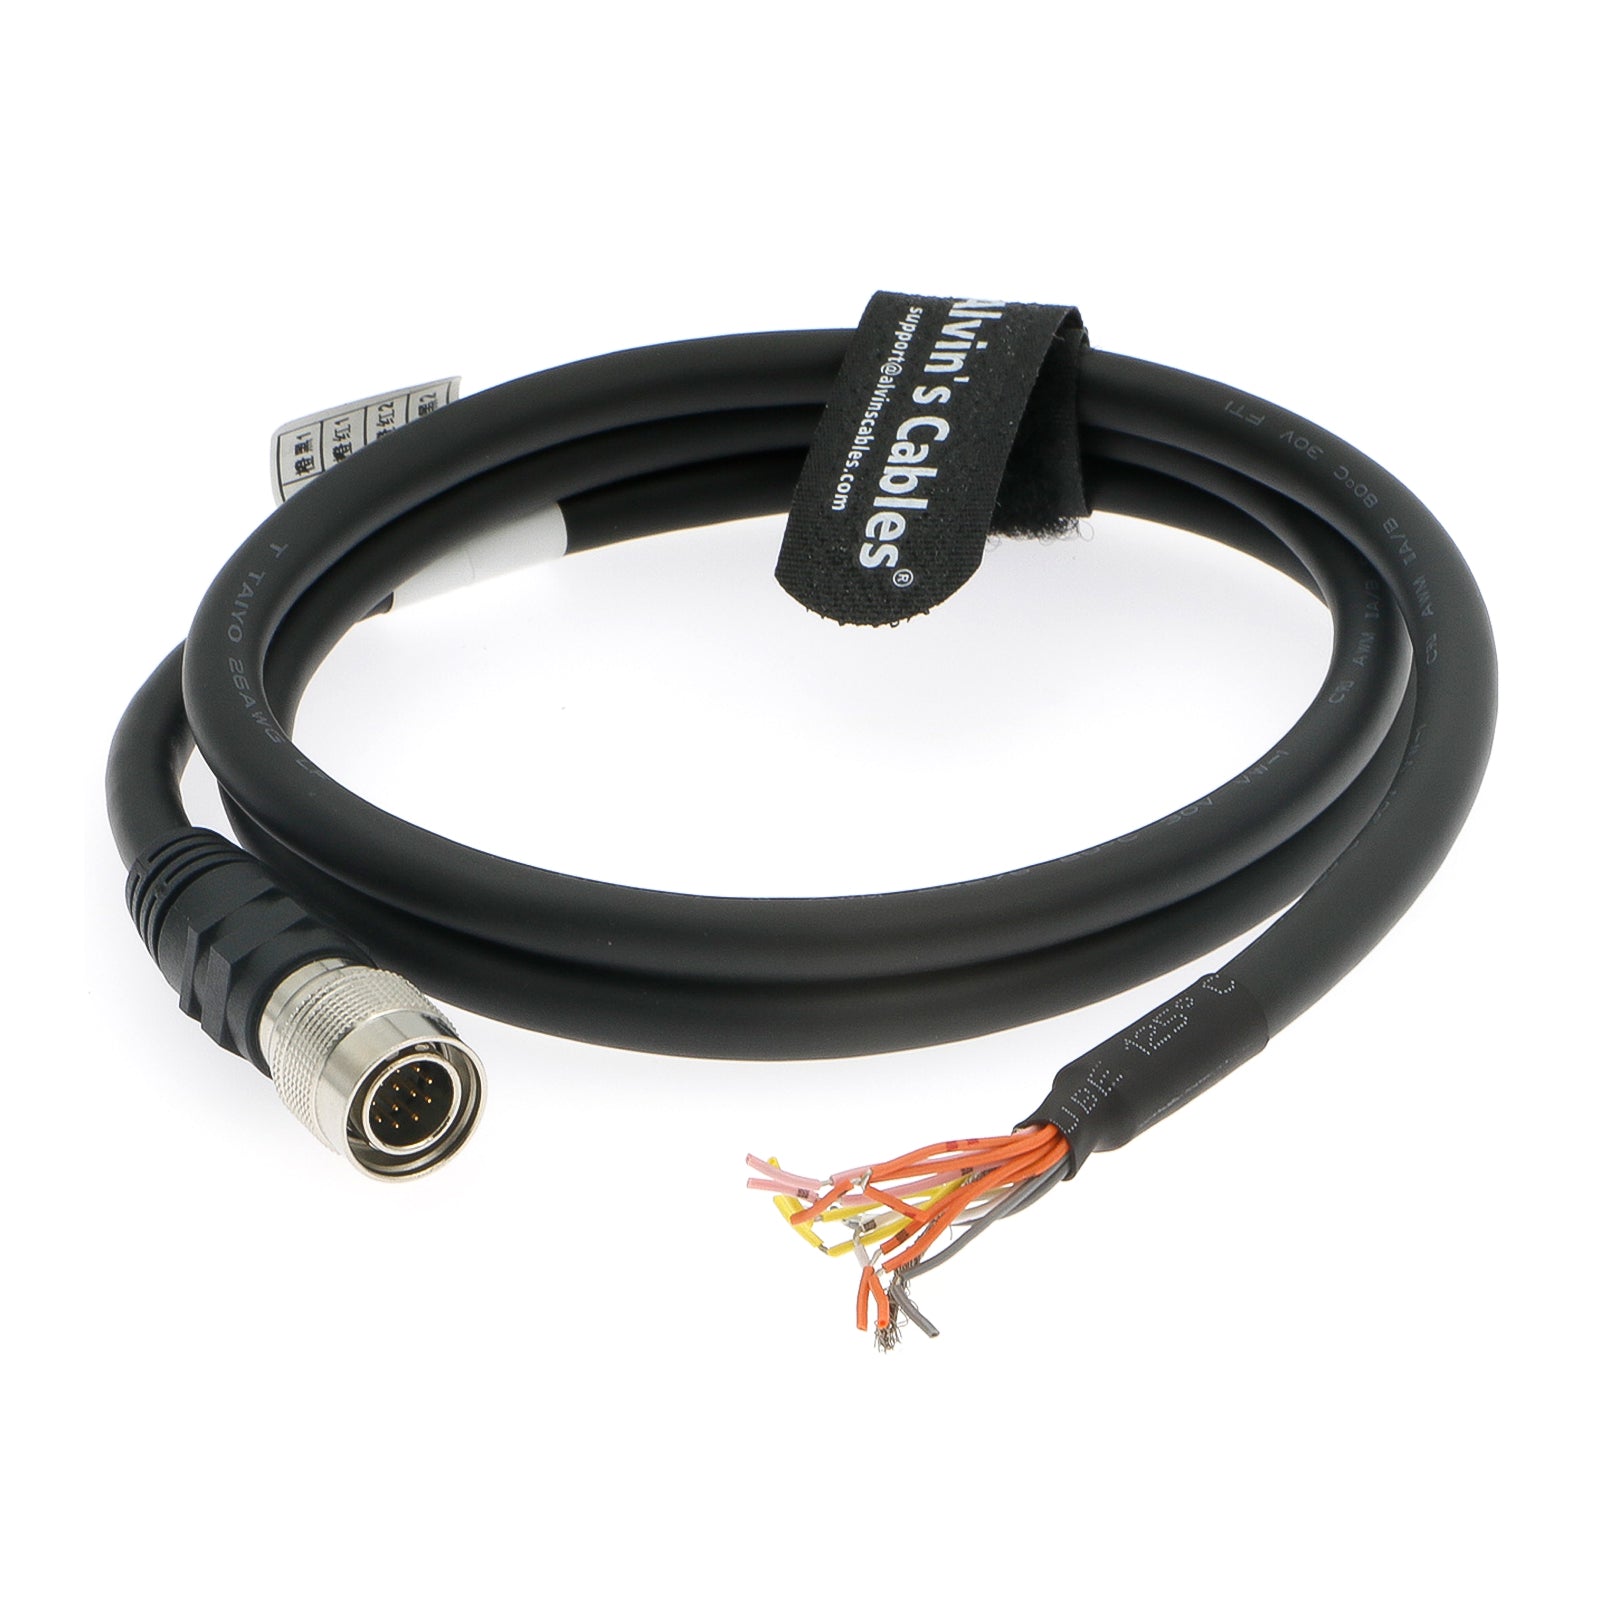 Alvin's Cables 12 Pin Hirose Male HR10A-10P-12P High Flex Power IO Cable for Camera 1M